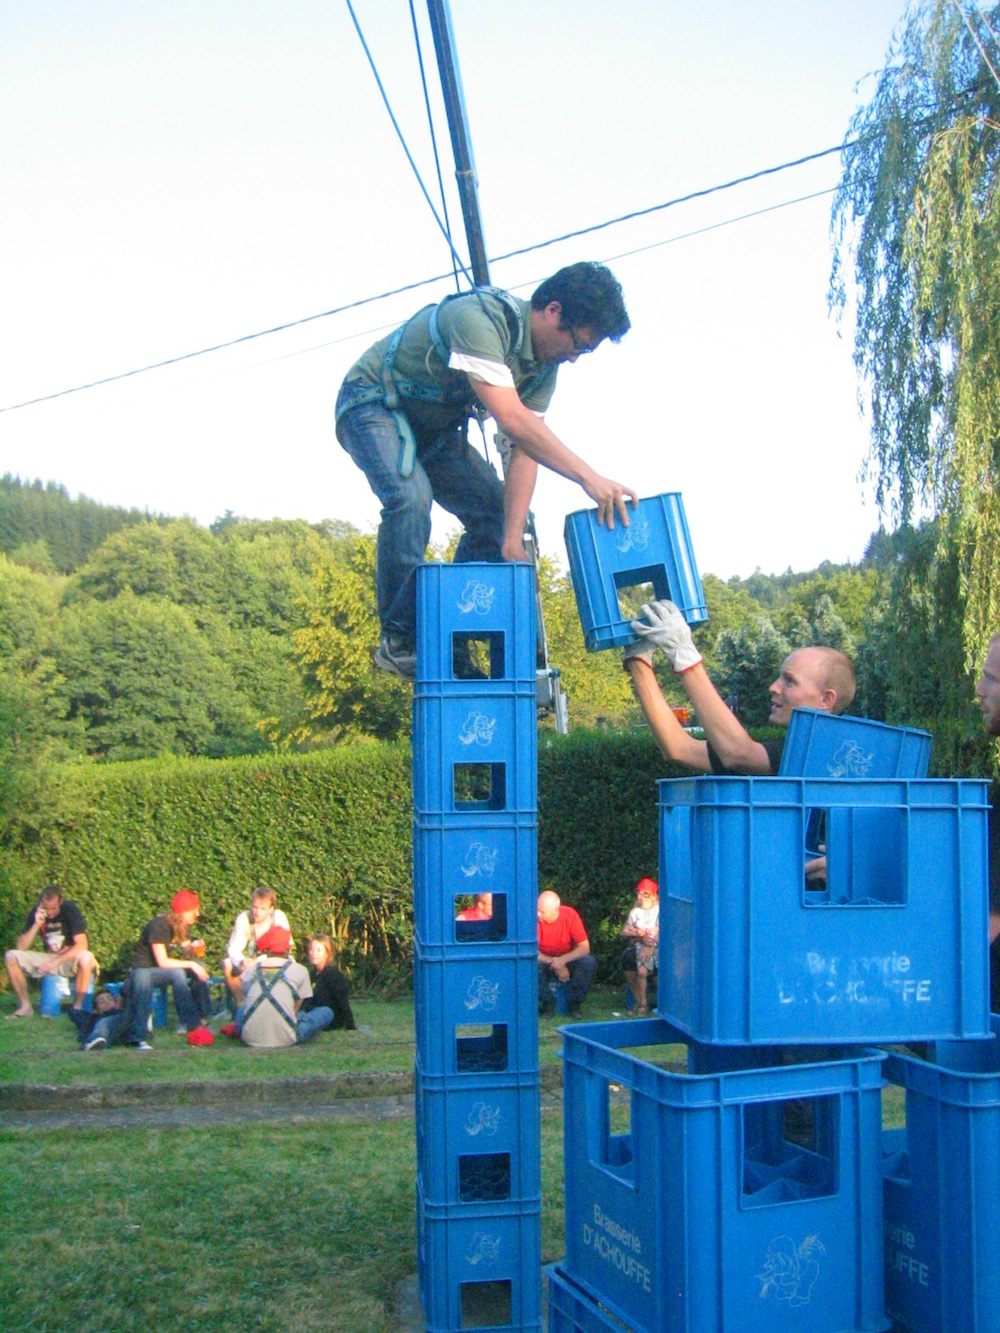 American, Jim Cheng demonstrates remarkable balance in the beer crate stacking competition - Photo courtesy Chris Bauweraerts